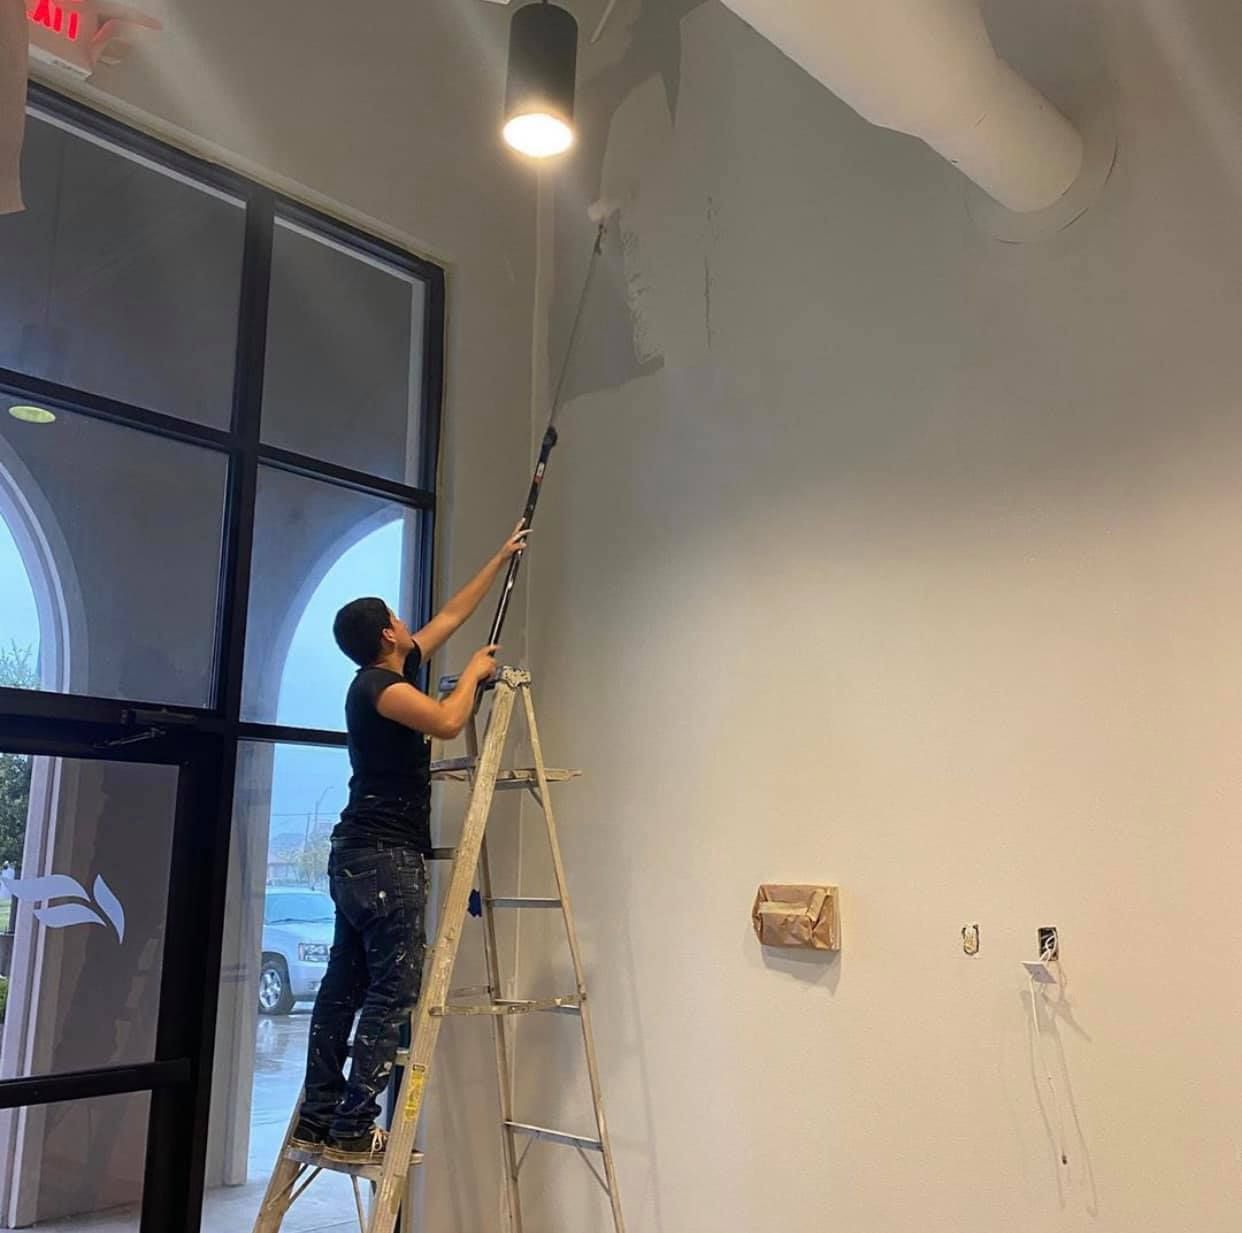 We specialize in painting commercial properties and can handle jobs of all sizes. We are a trusted and detail-oriented painting company that has years of experience in the industry.  Contact us today to discuss your painting needs! for 911 Houston Painters, LLC in Houston, TX